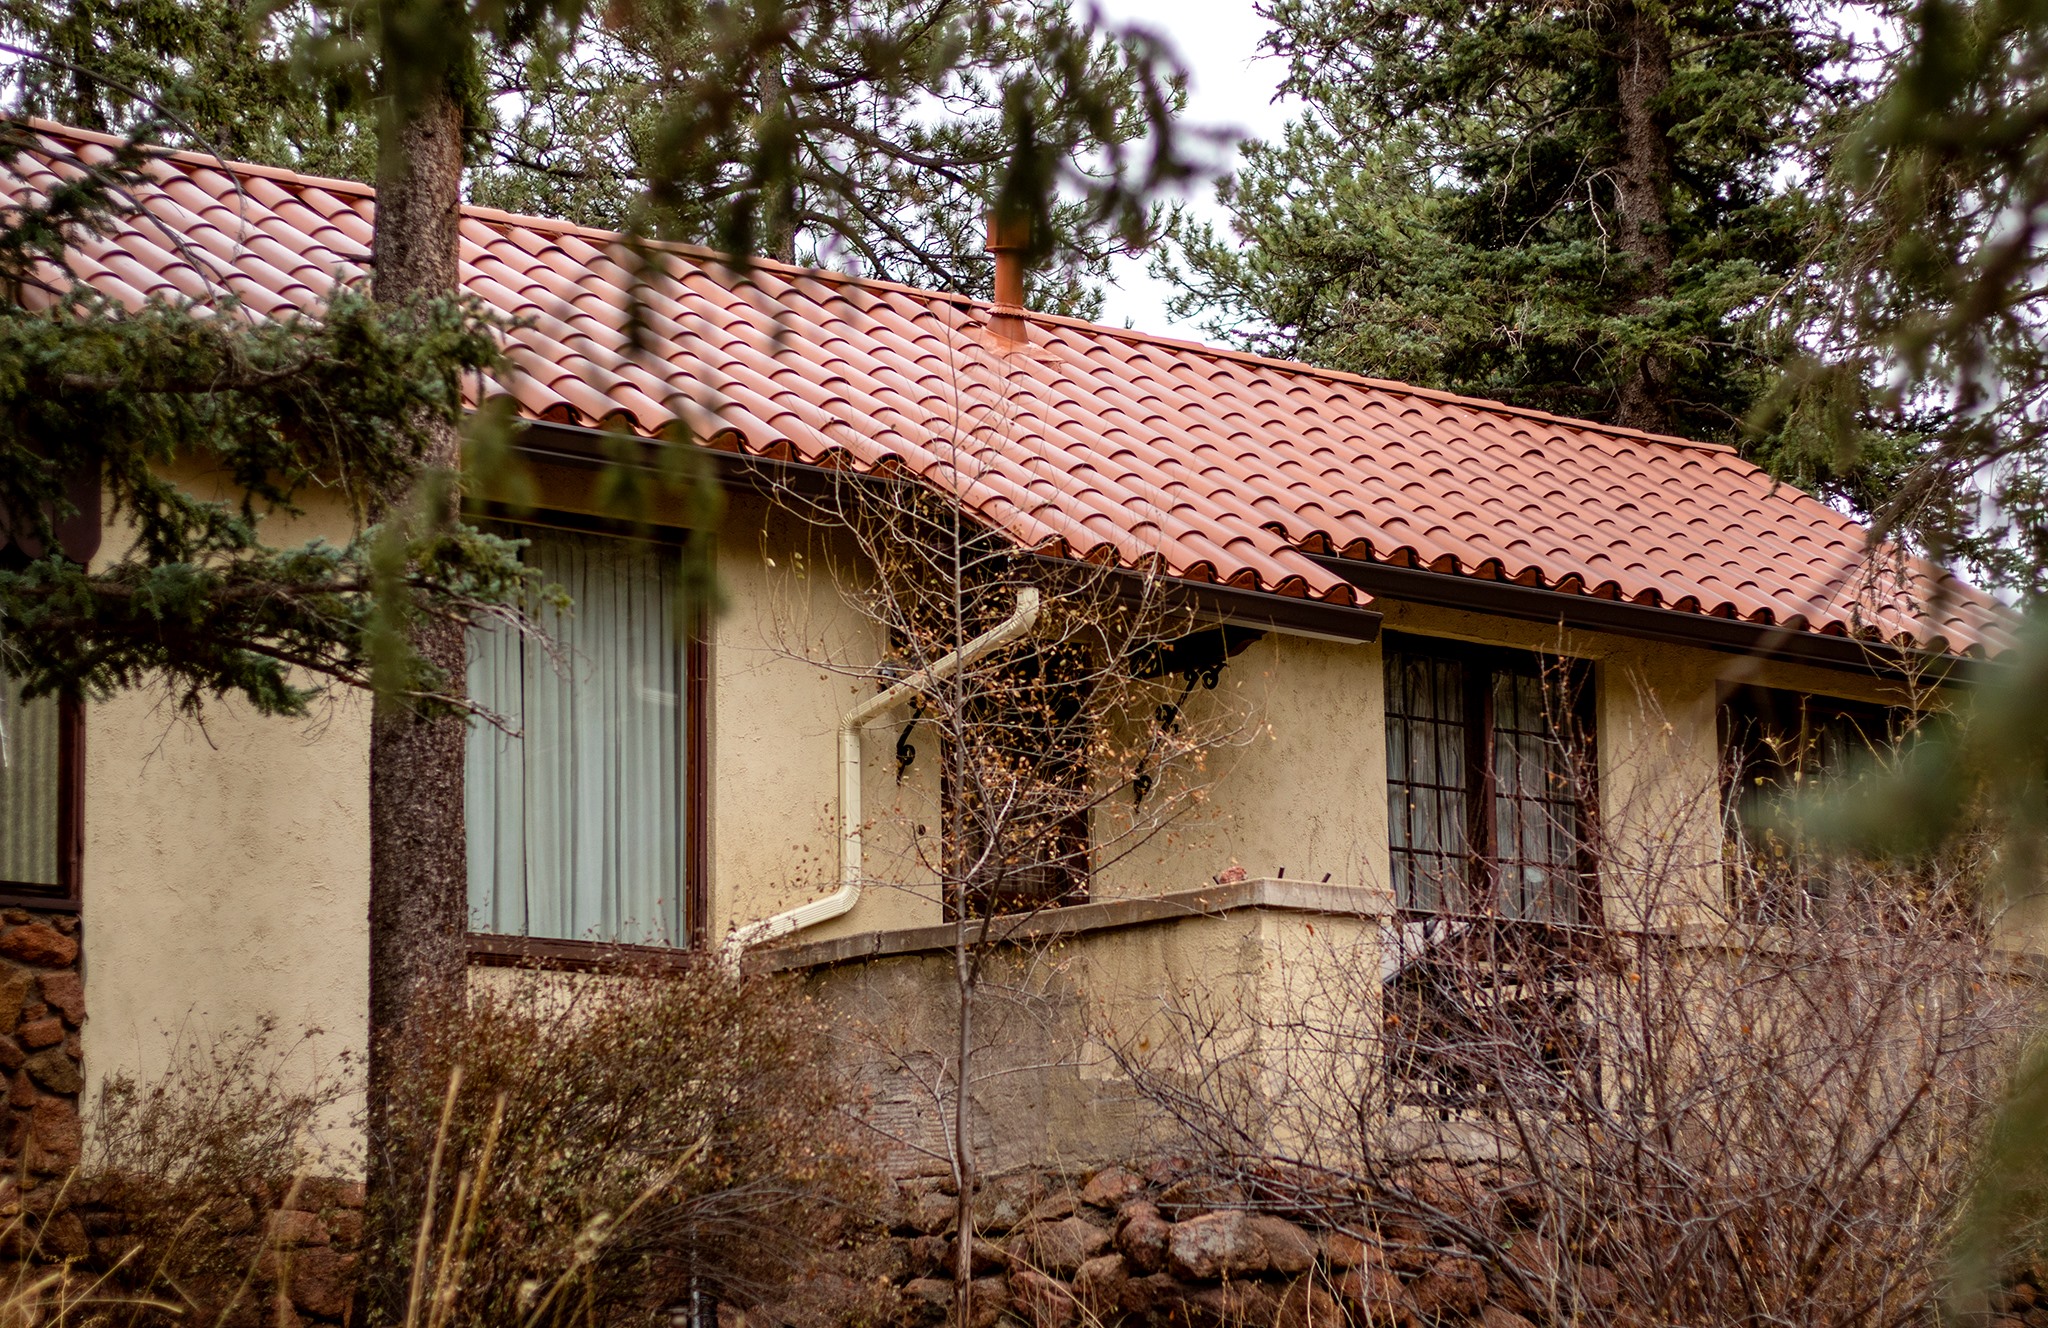 Clay roofing tile, shown on a home in fire-prone Colorado